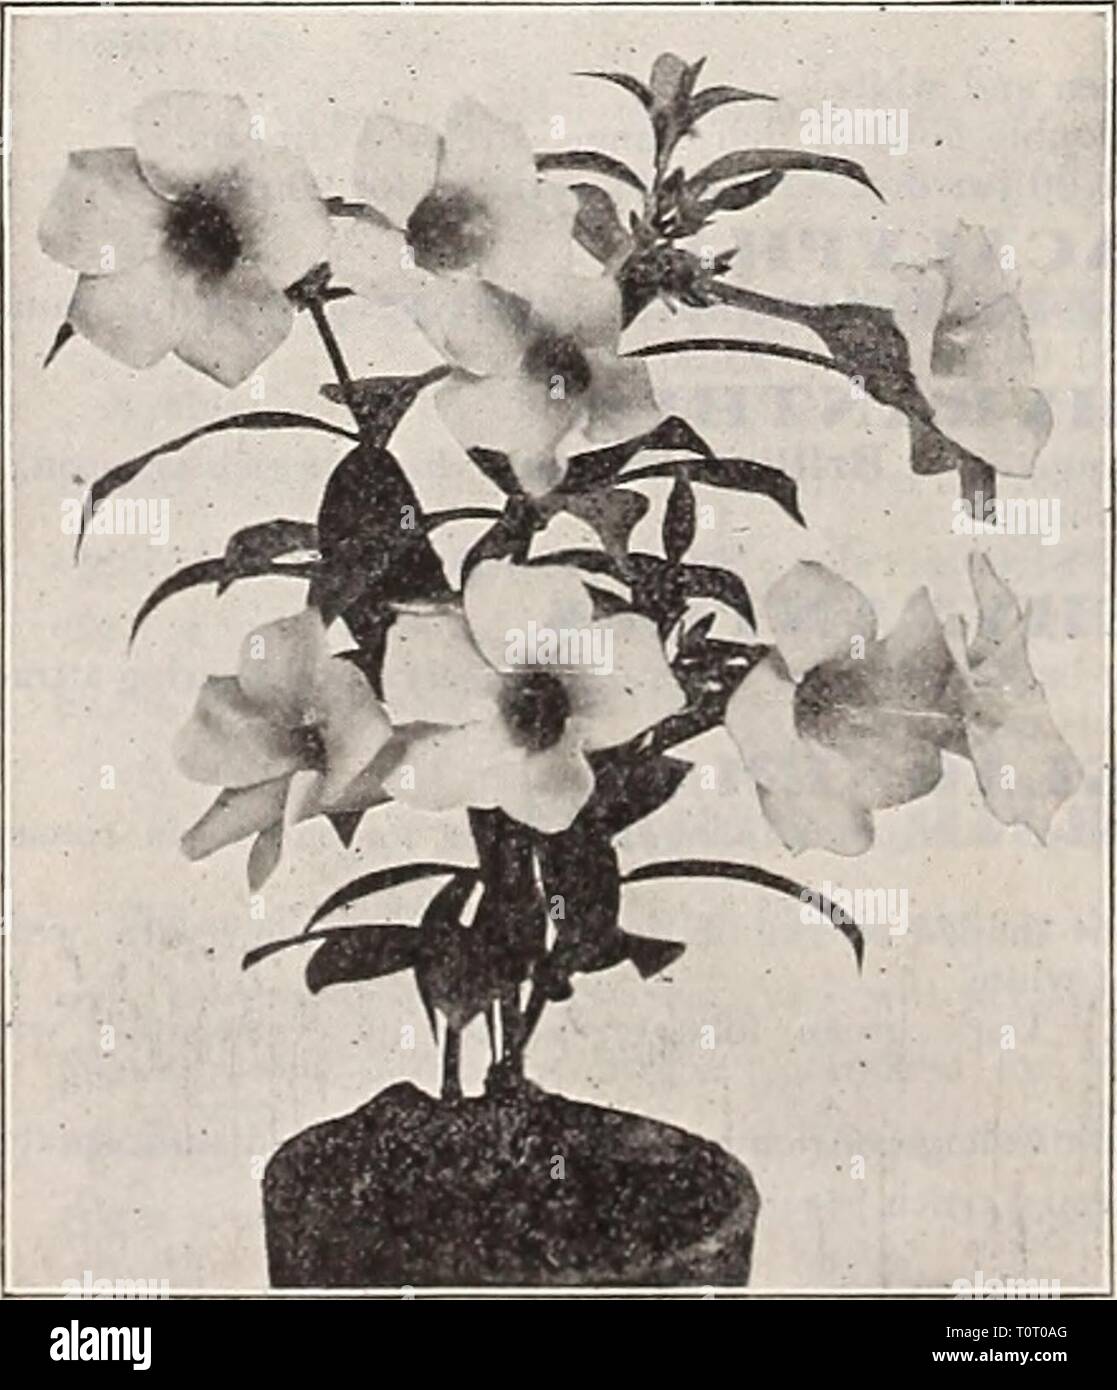 Dreer's 1909 garden book (1909) Dreer's 1909 garden book  dreers1909garden1909henr Year: 1909  Amohphophallus Rivieri.    Allamanda Williamsii. PuniceilS. A greenhouse shrub of easy growth with yellowish flowers and bright red bracts, which remain attractive from January to April; should be grown in rather small pots. 50 cts. each. A5IORPHOPHALLIS. Rivieri. Particularly handsome plant for growing either in clumps or as a solitary specimen. Should be planted in May in warm, sunny sit- uation in extra rich soil; the flowers appear before the leaves and rise to a height of 2 feet and resemble a g Stock Photo